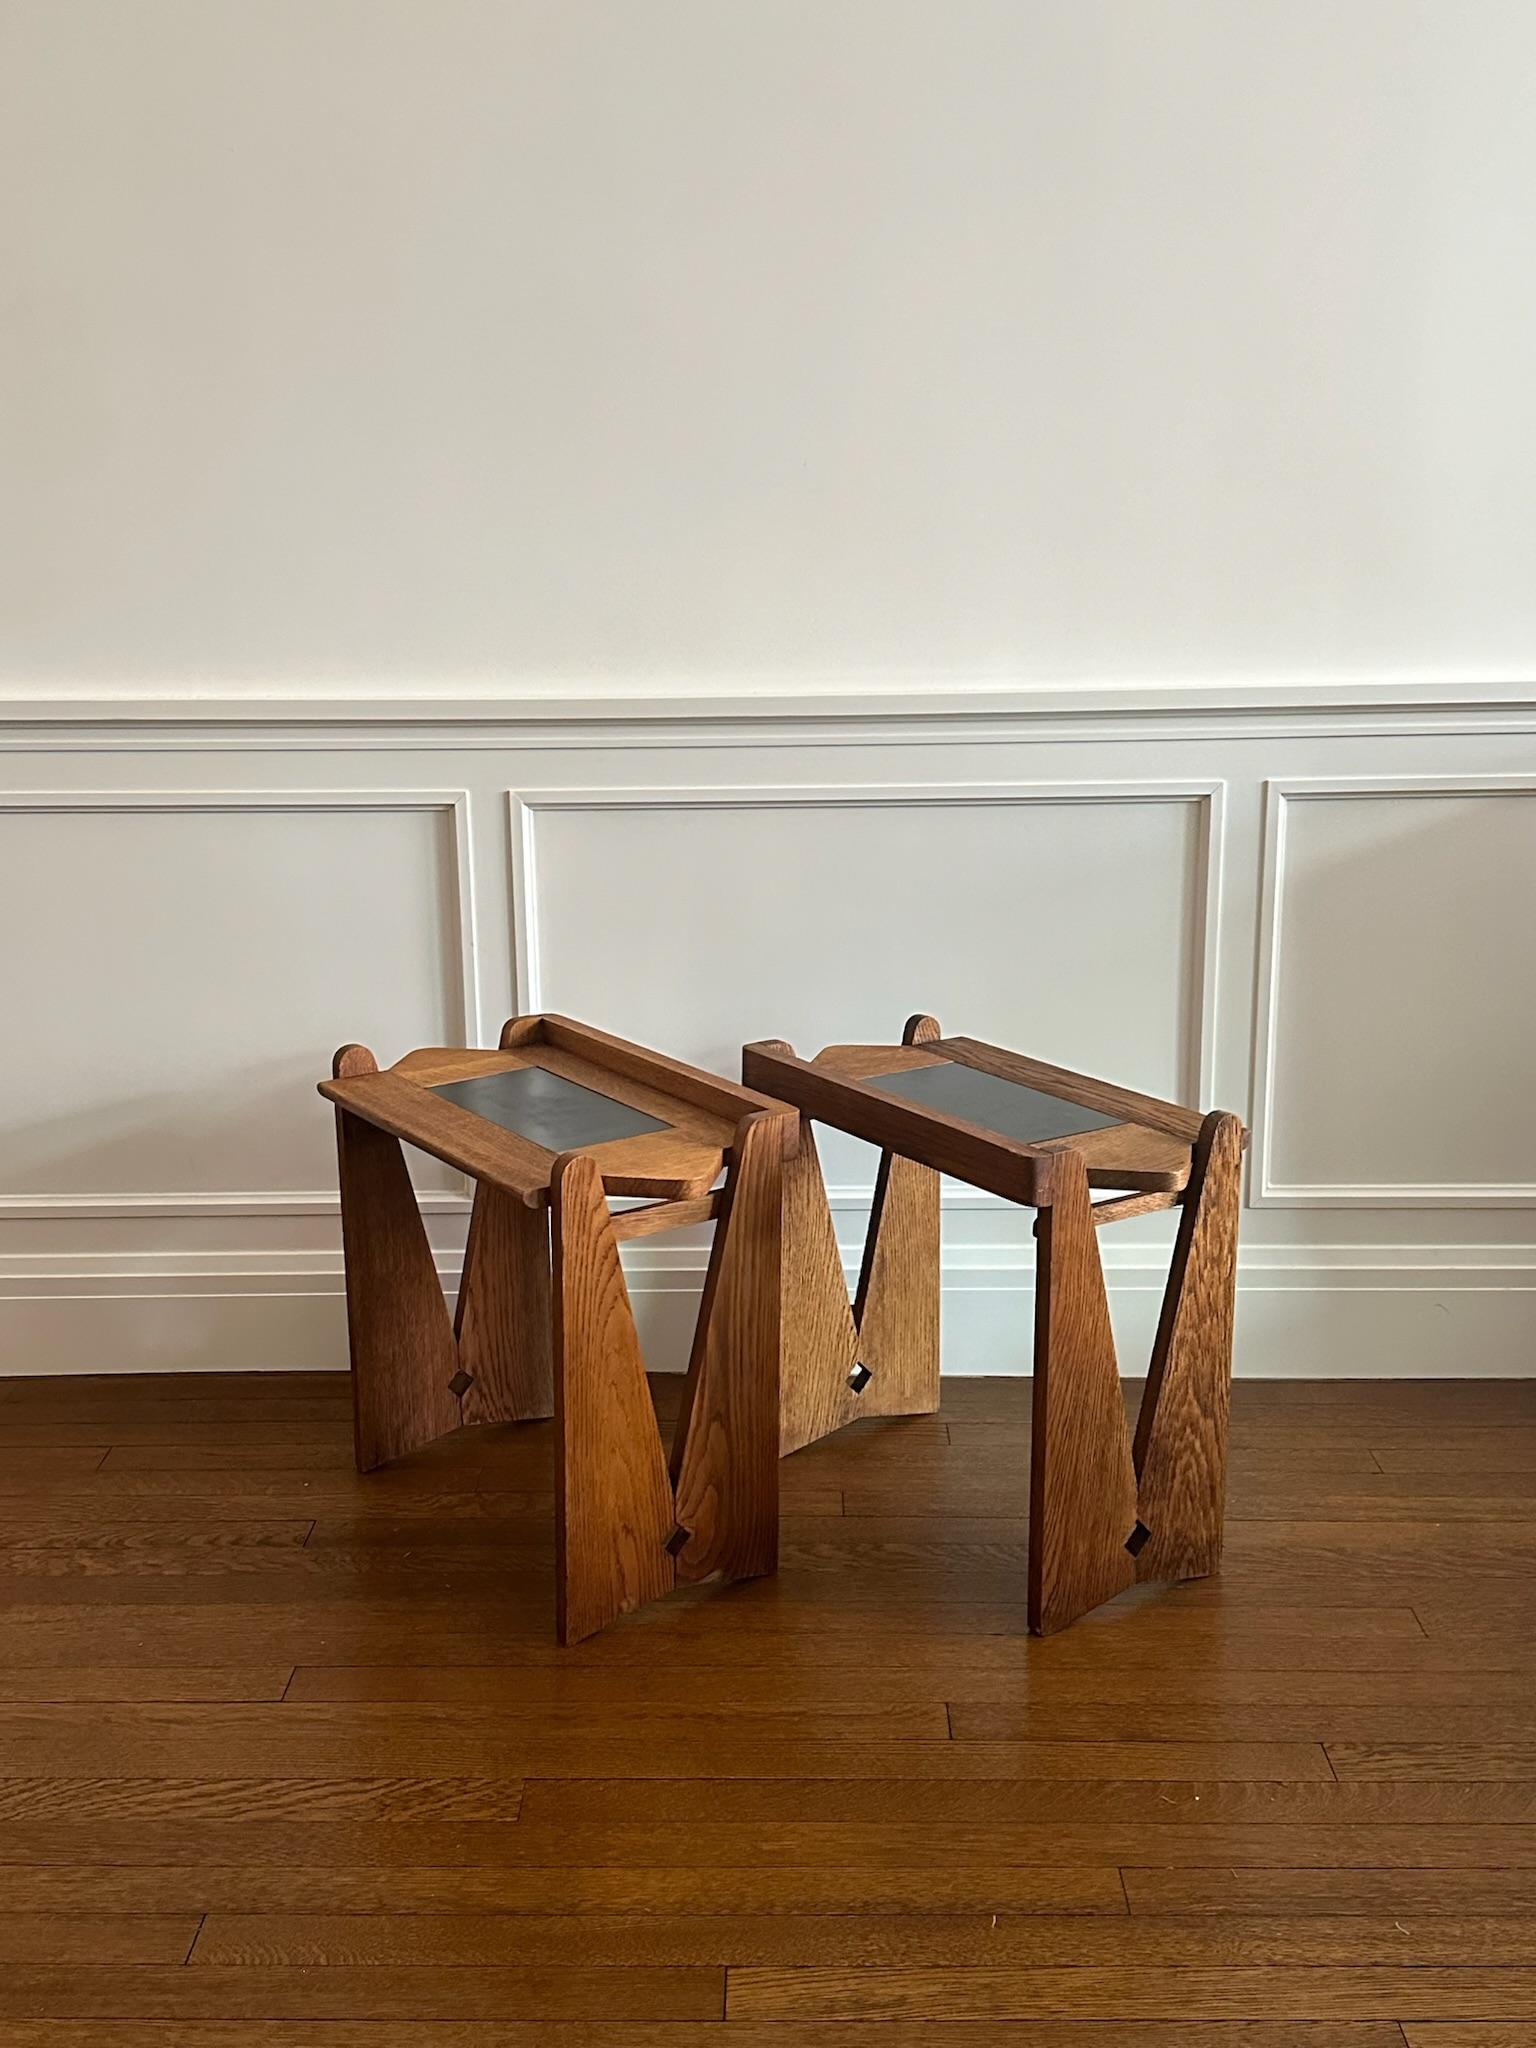 Pair of side tables by Robert Guillerme crafted from oak wood dating back to France in the 1960s with carved elements on the tops and sides.  In good condition with no major blemishes besides small chips in the wood on the top.